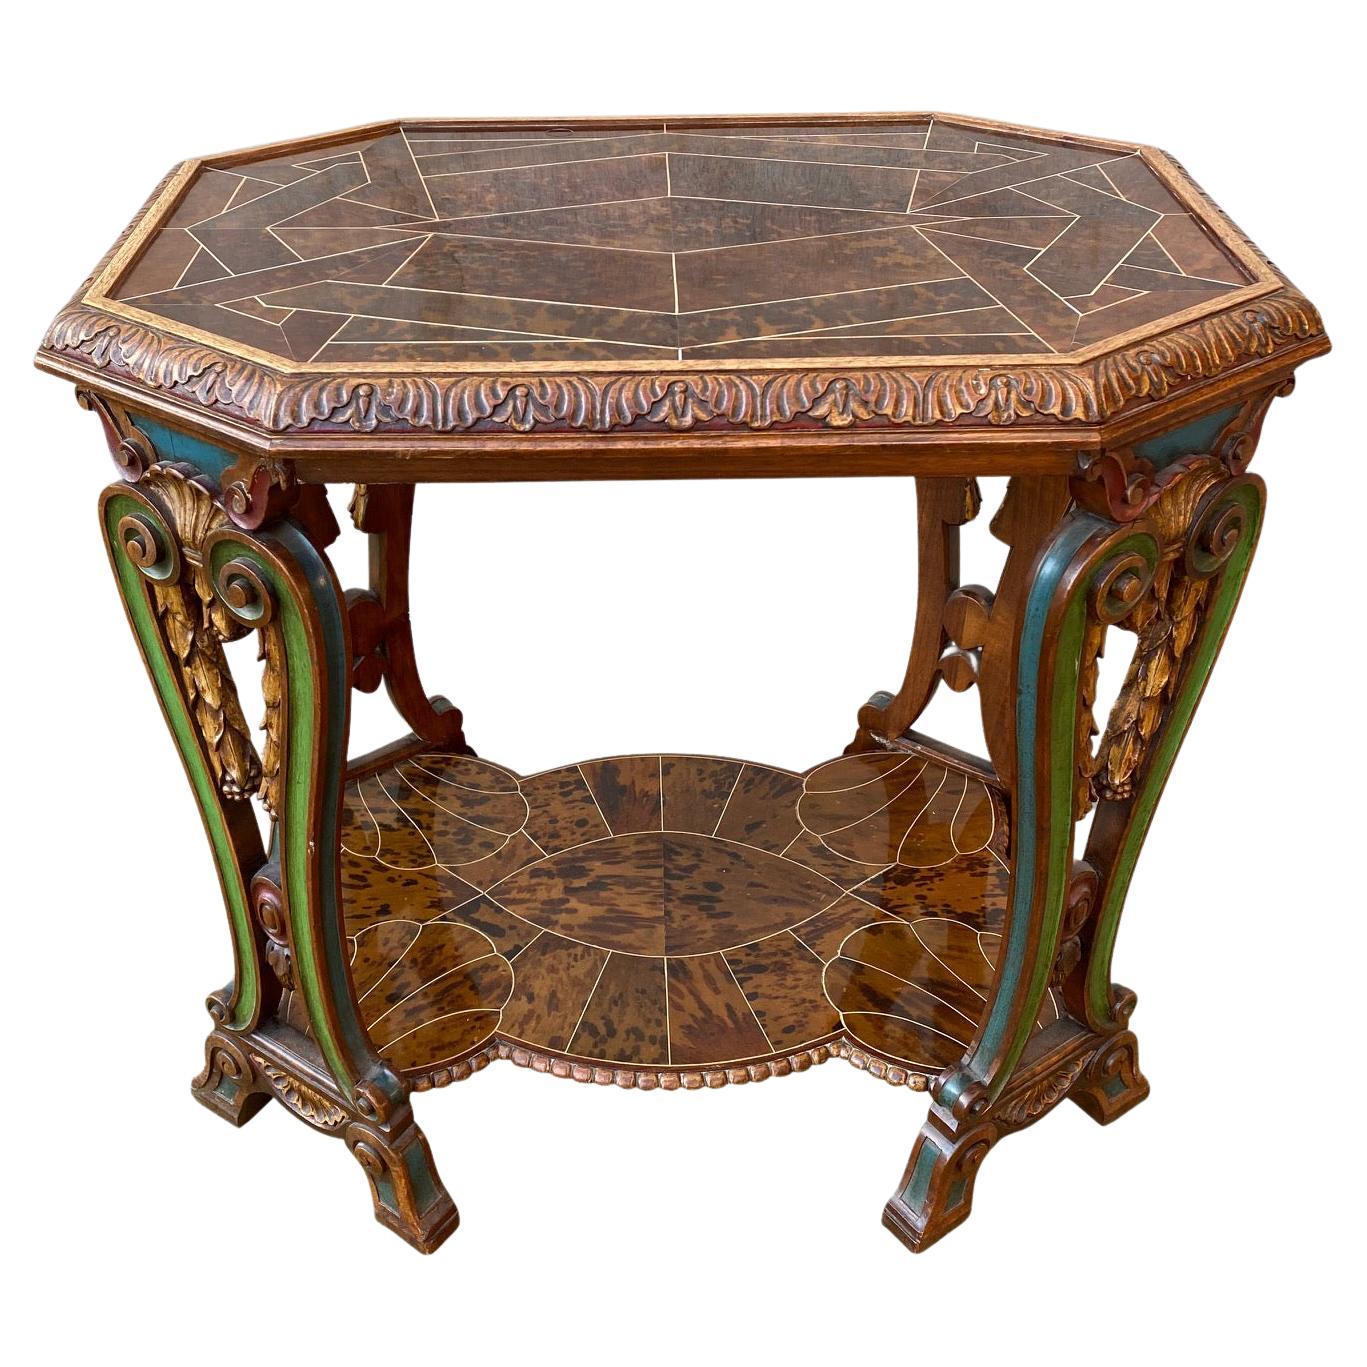 20th Century Art Deco Occasional Table by Maison Franck Antwerp Belgium For Sale